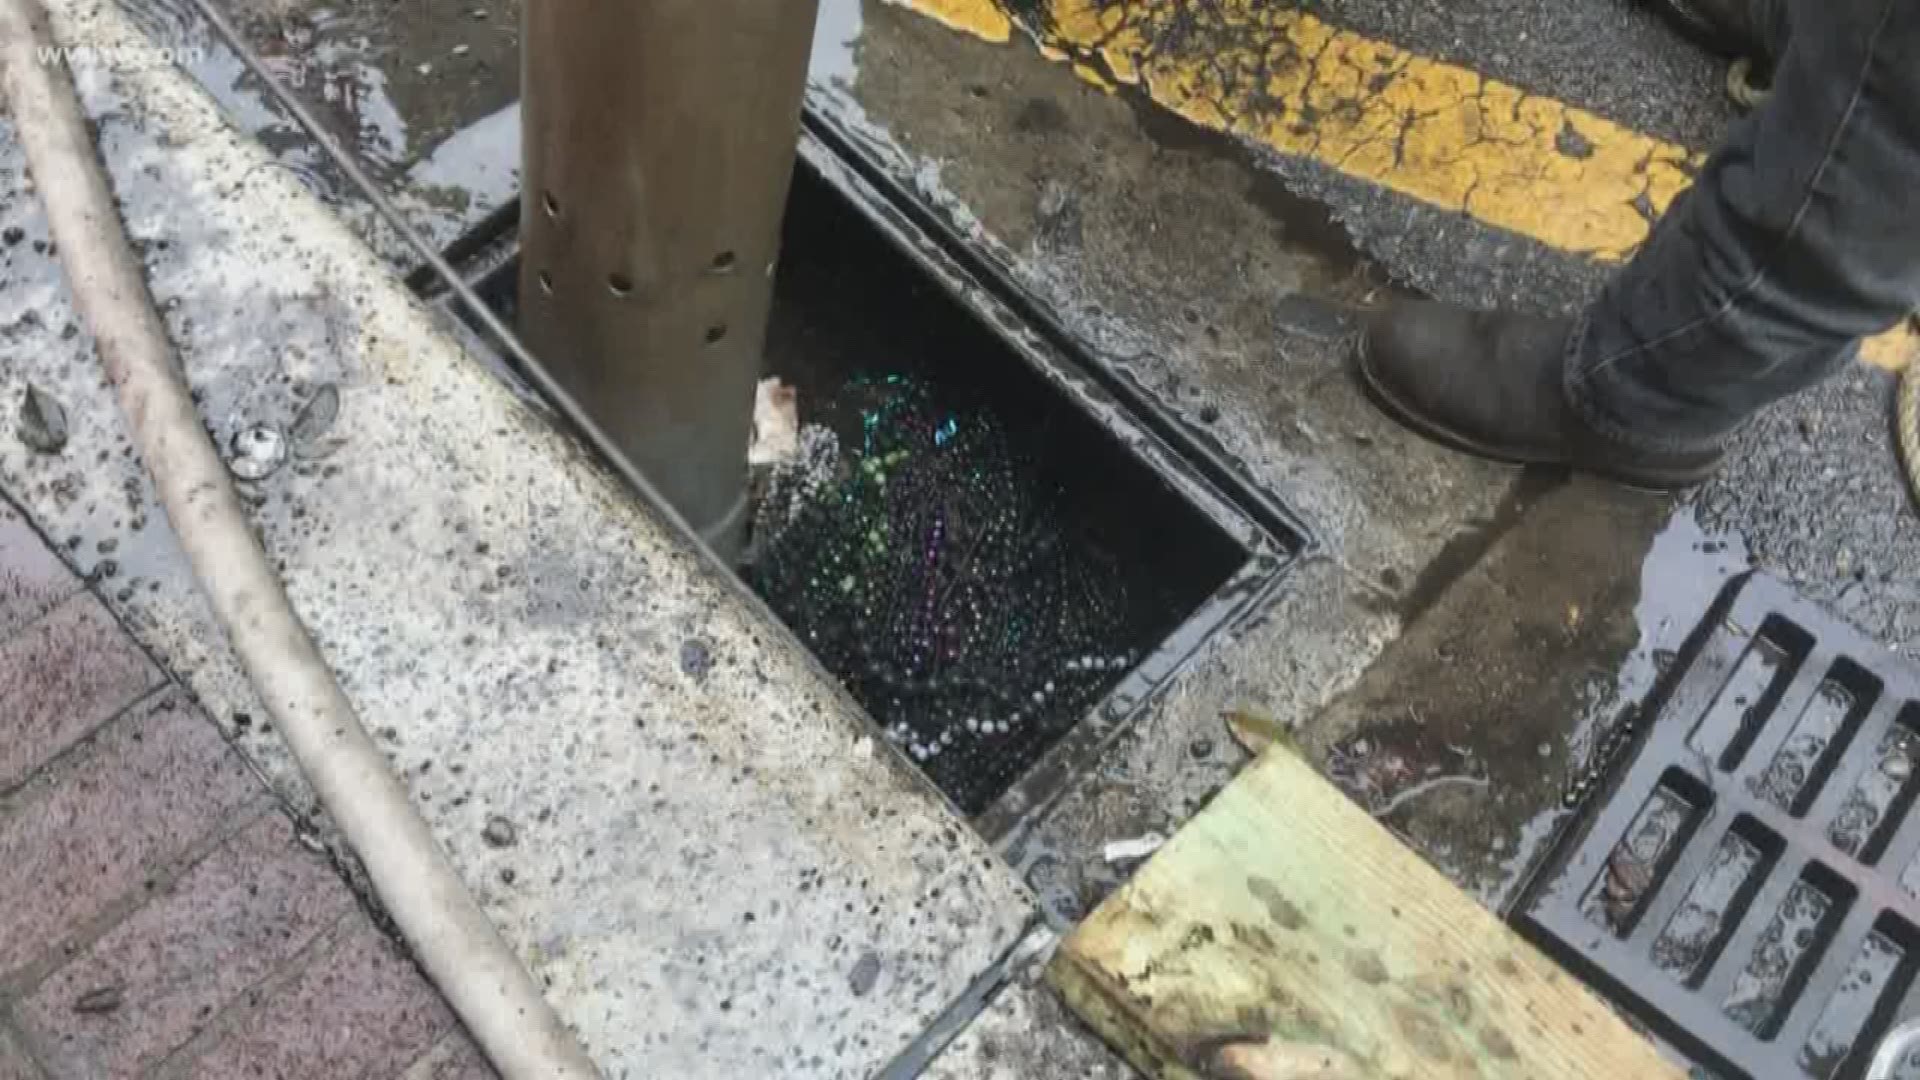 Last year, 46,000 tons of beads were found in clogged catch basins on just several blocks of the St. Charles Street parade route.